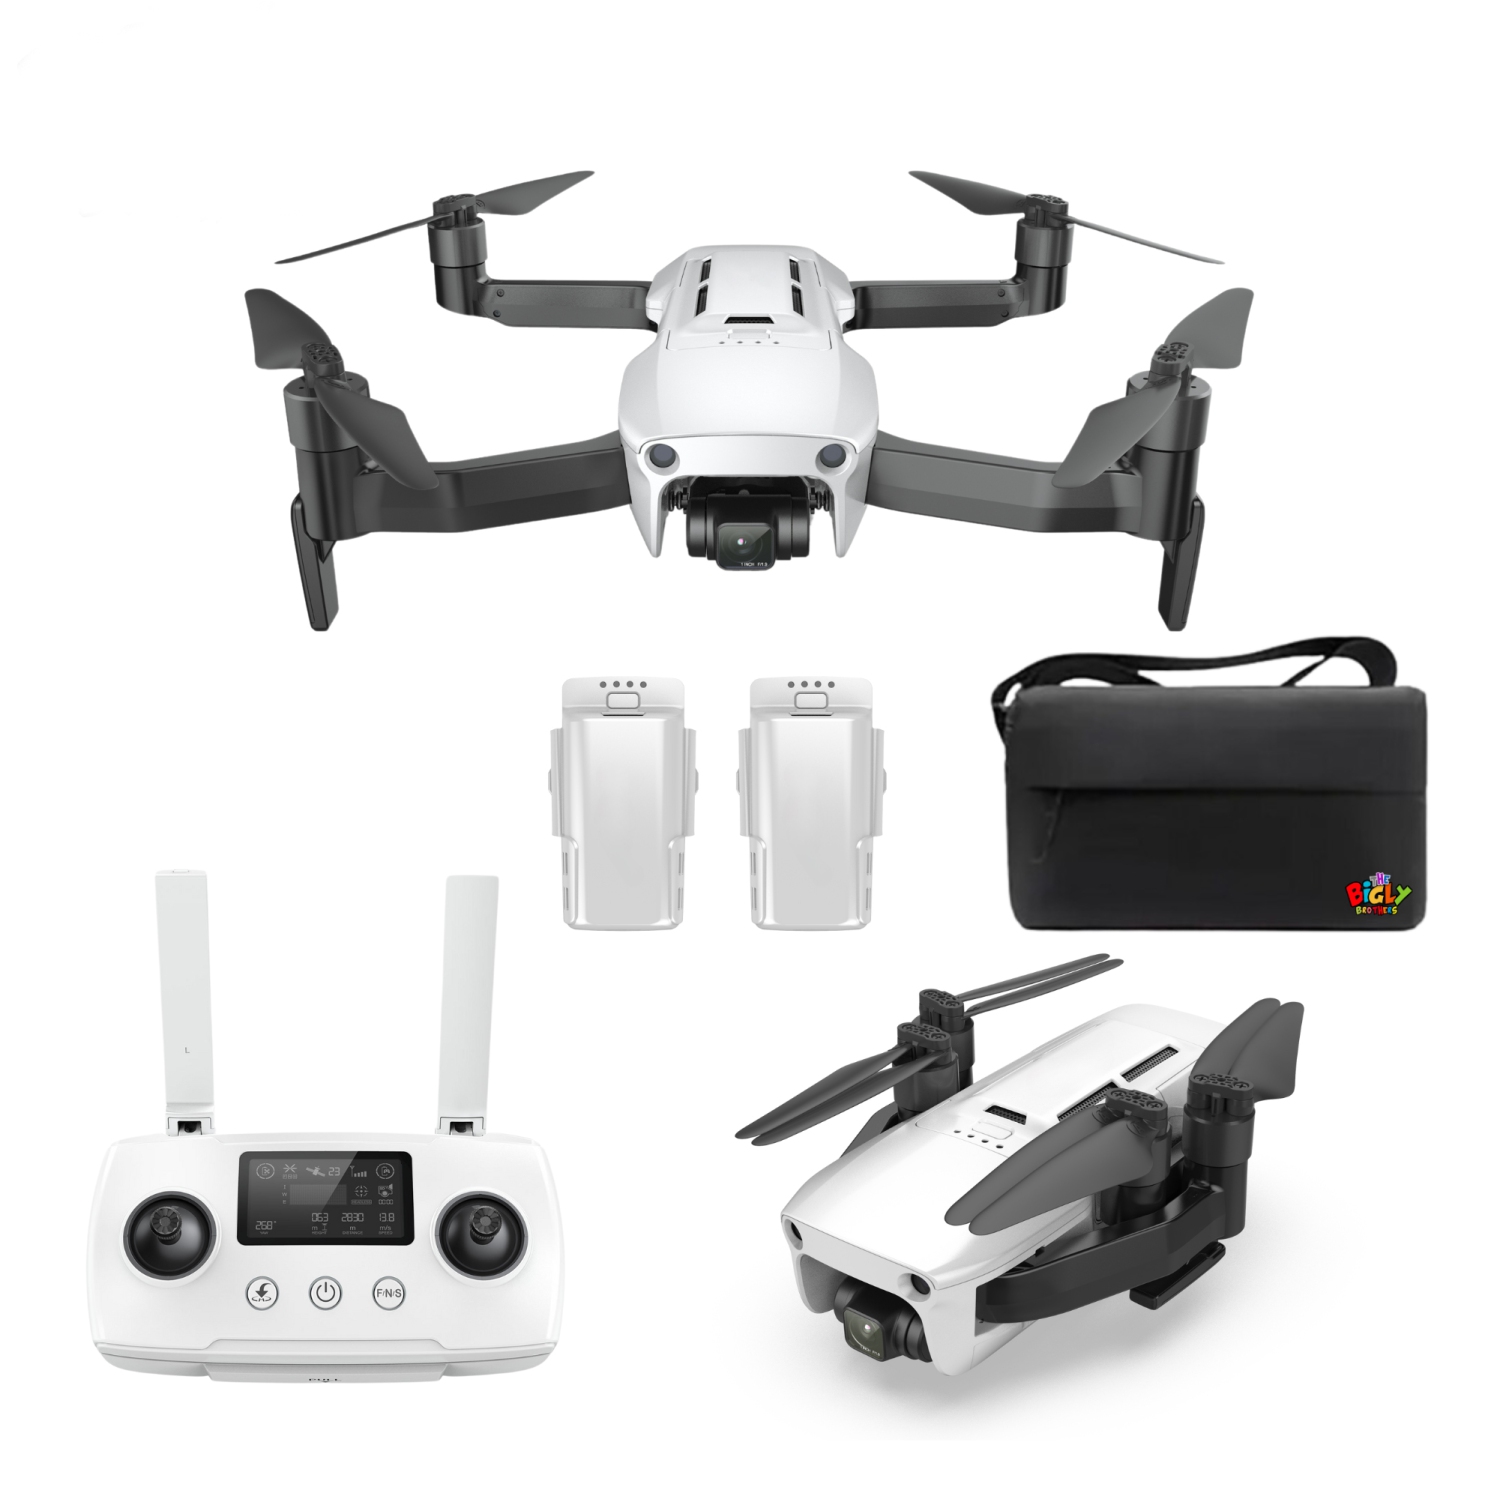 The Bigly Brothers Ace 2 Pro Sky Voyager Intrepid Class GPS Drone, 20MP Camera, 16km Range, Level 8 Wind Resistance, Waterproof/Snowproof, Heavy Duty Professional Grade Drone